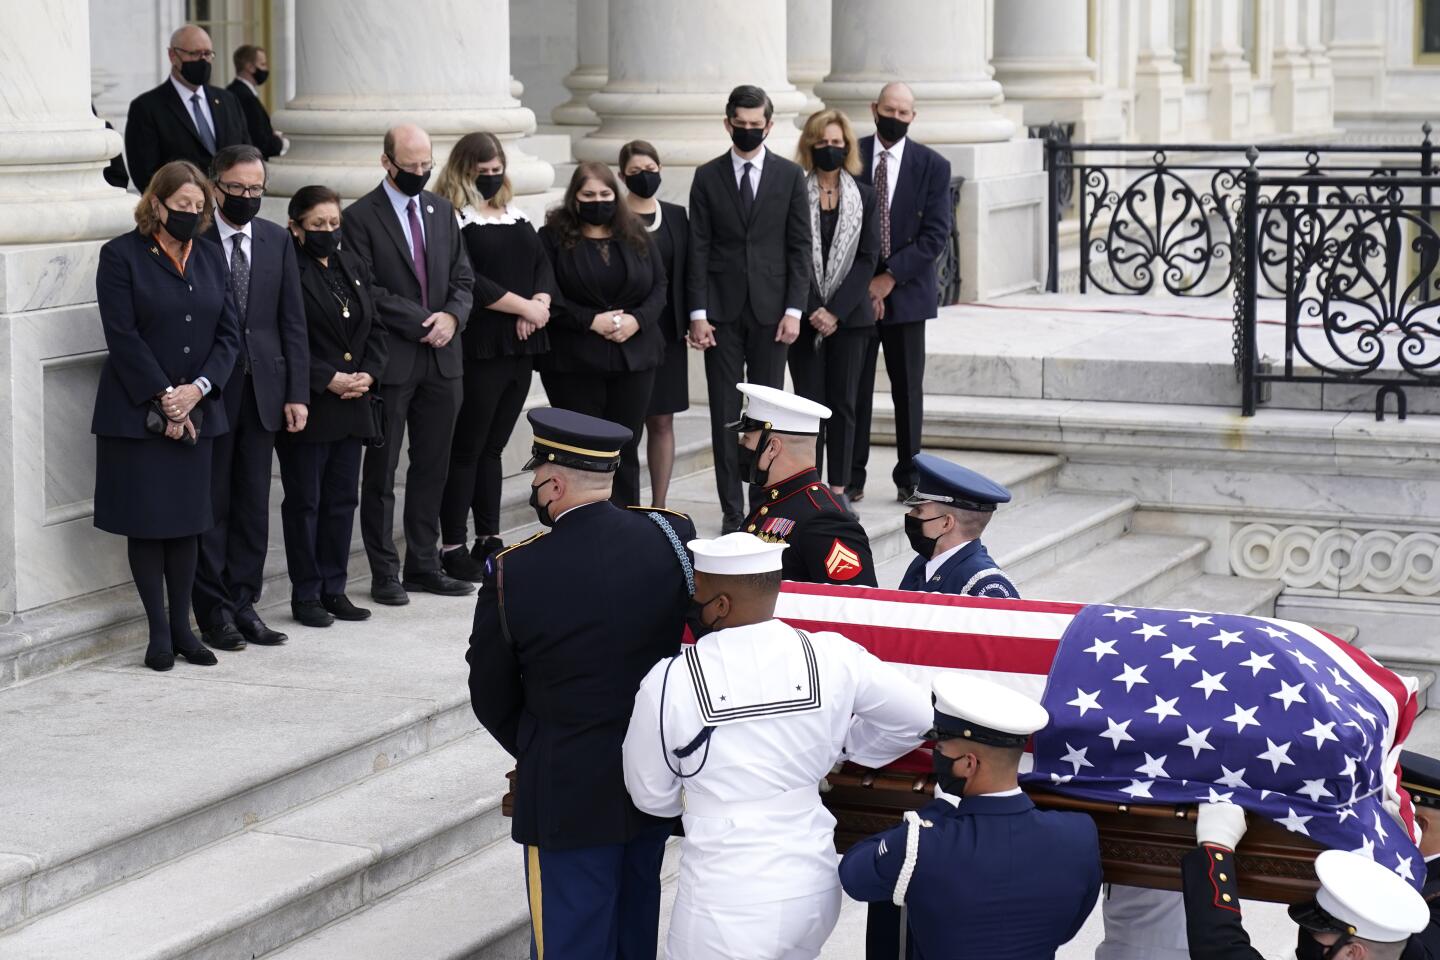 Family members watch as the casket of Justice Ruth Bader Ginsburg is carried by a military honor guard into the Capitol